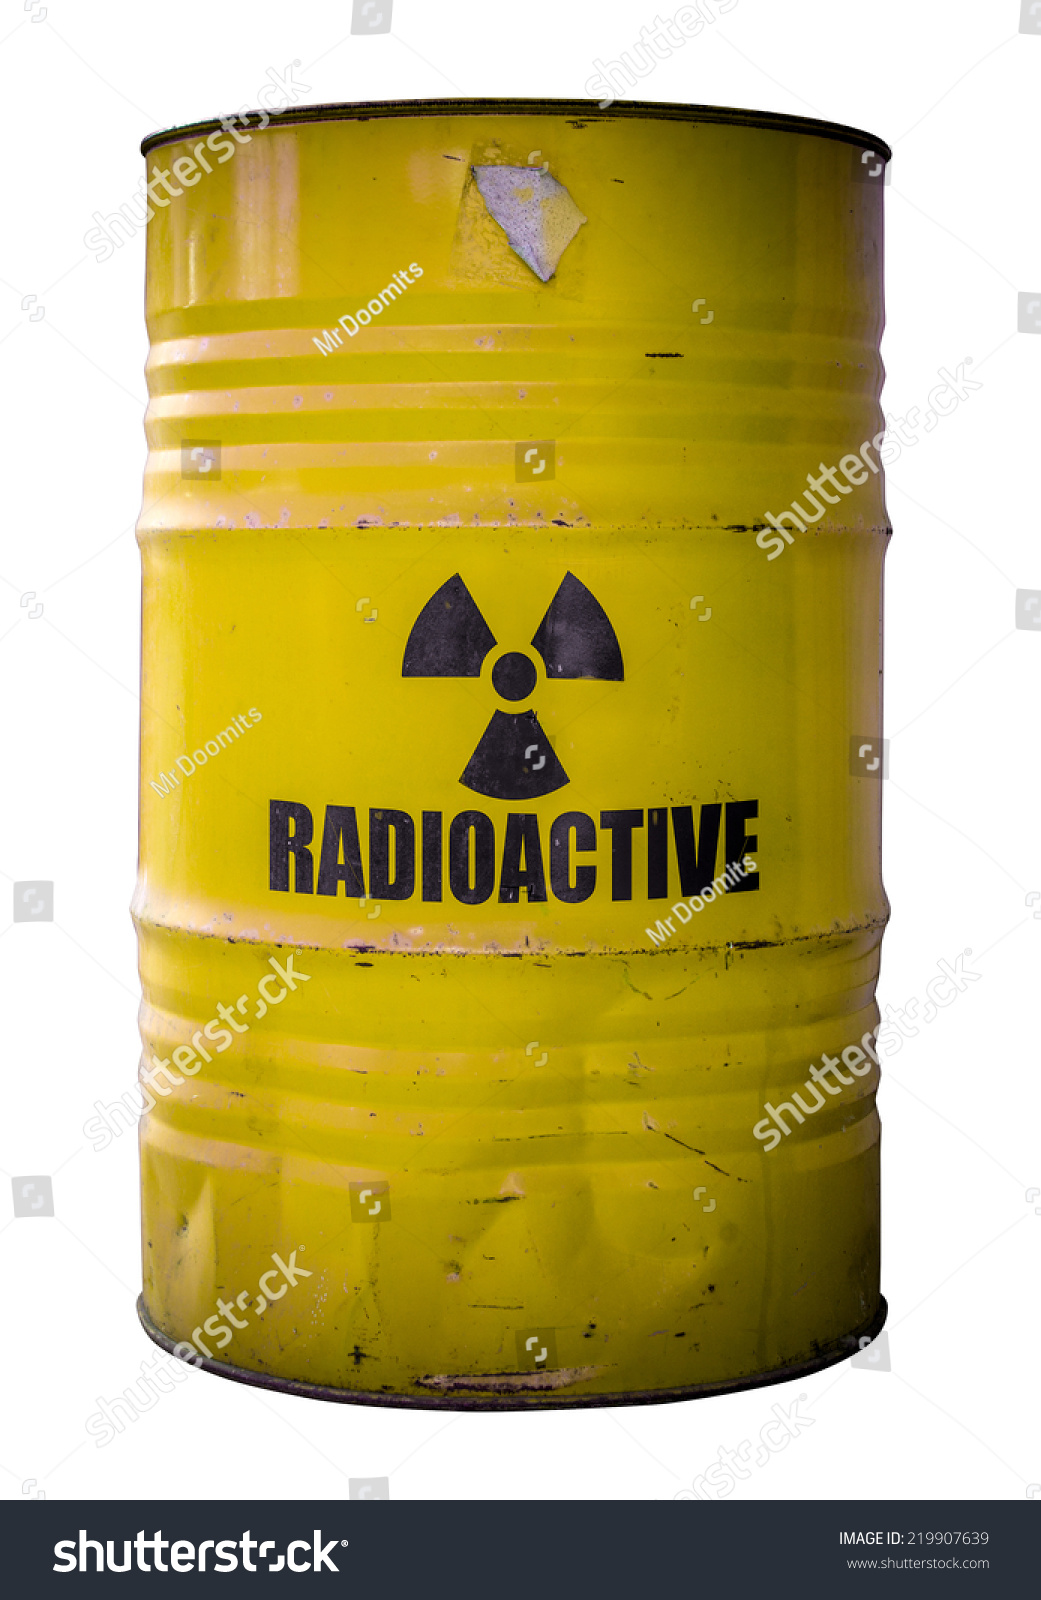 Grungy Barrel Drum Radioactive Nuclear Waste Stock Photo 219907639 ...